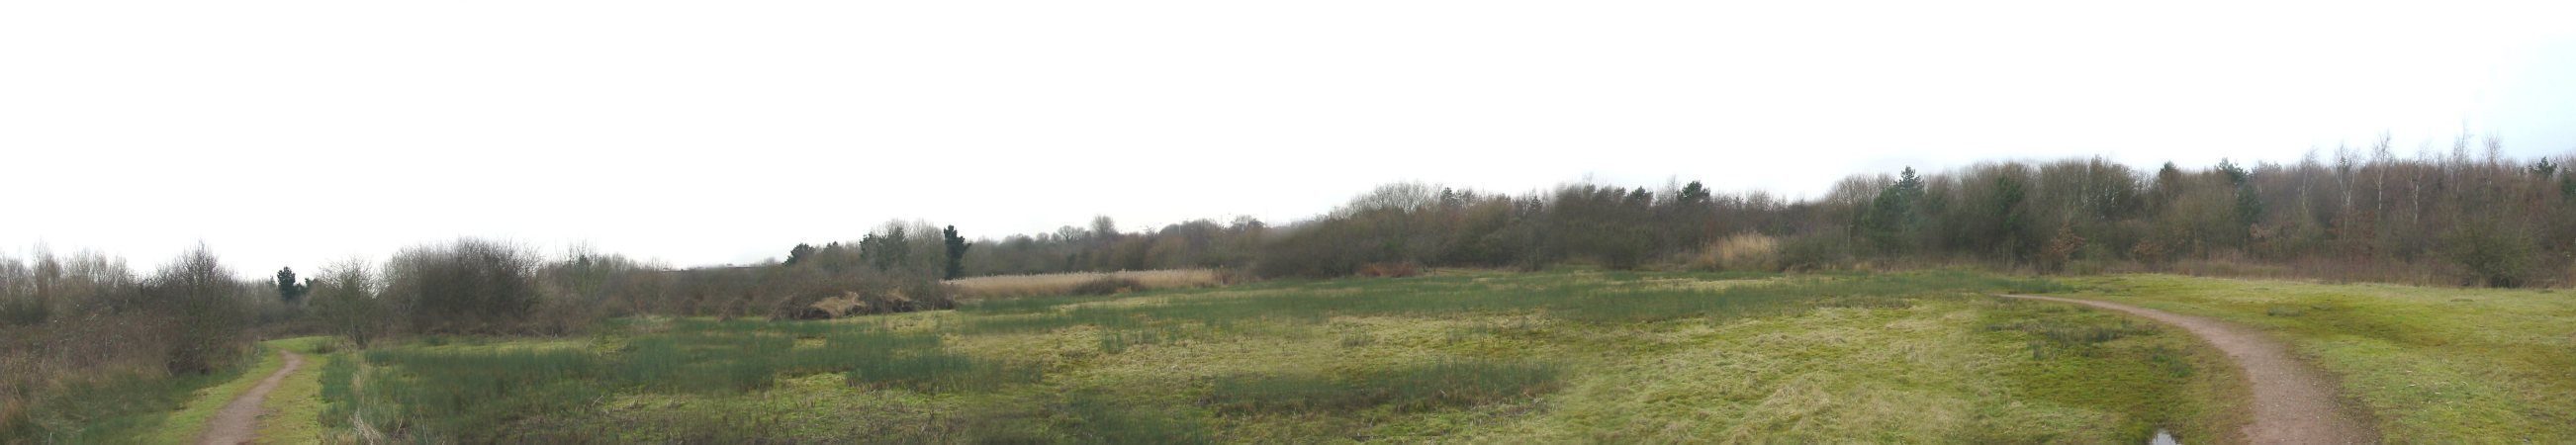 Scroll left and right
for full panorama of the
Wild Flower Meadow in Winter
13 th February 2009